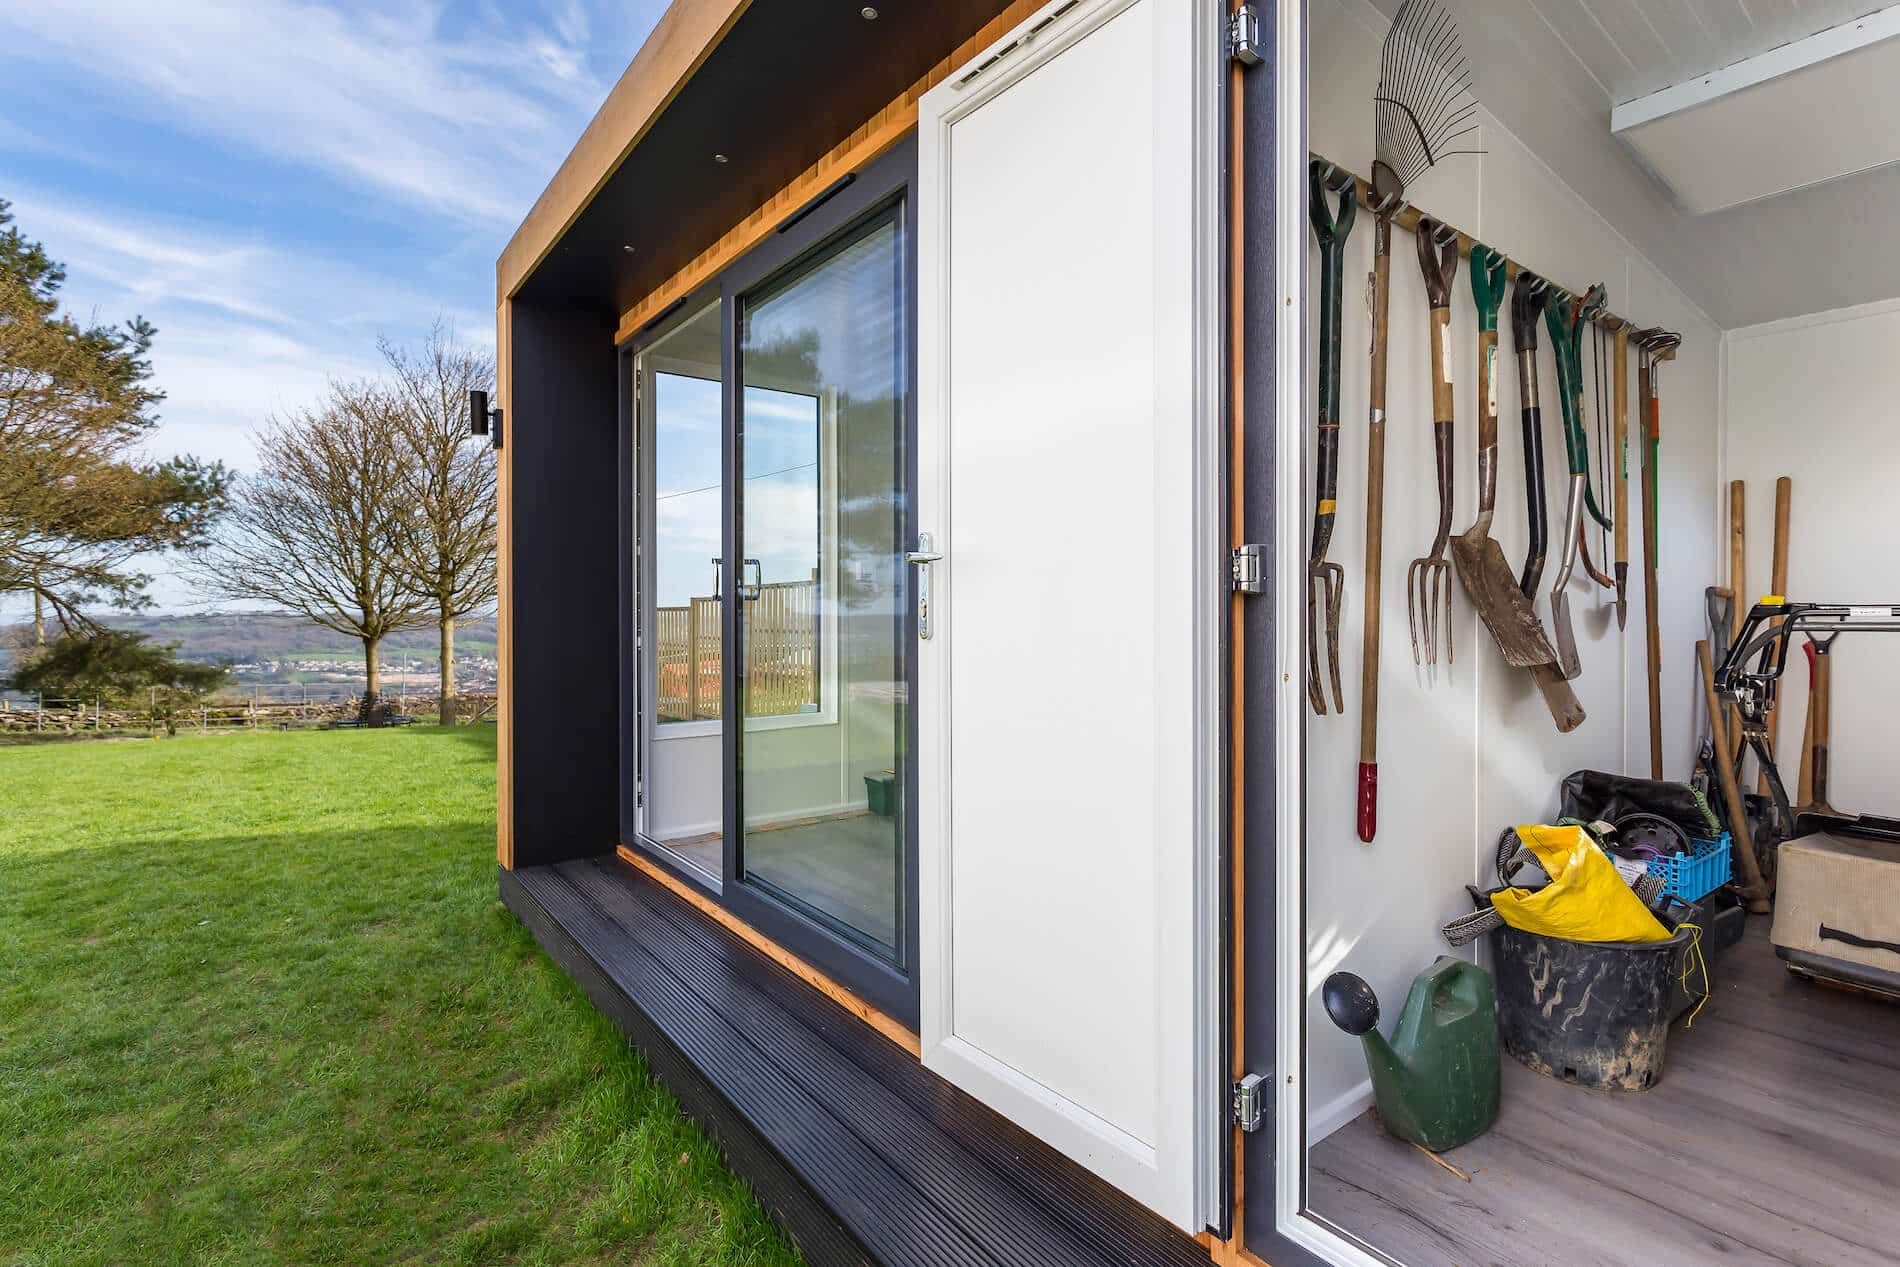 shed storage space in a garden room